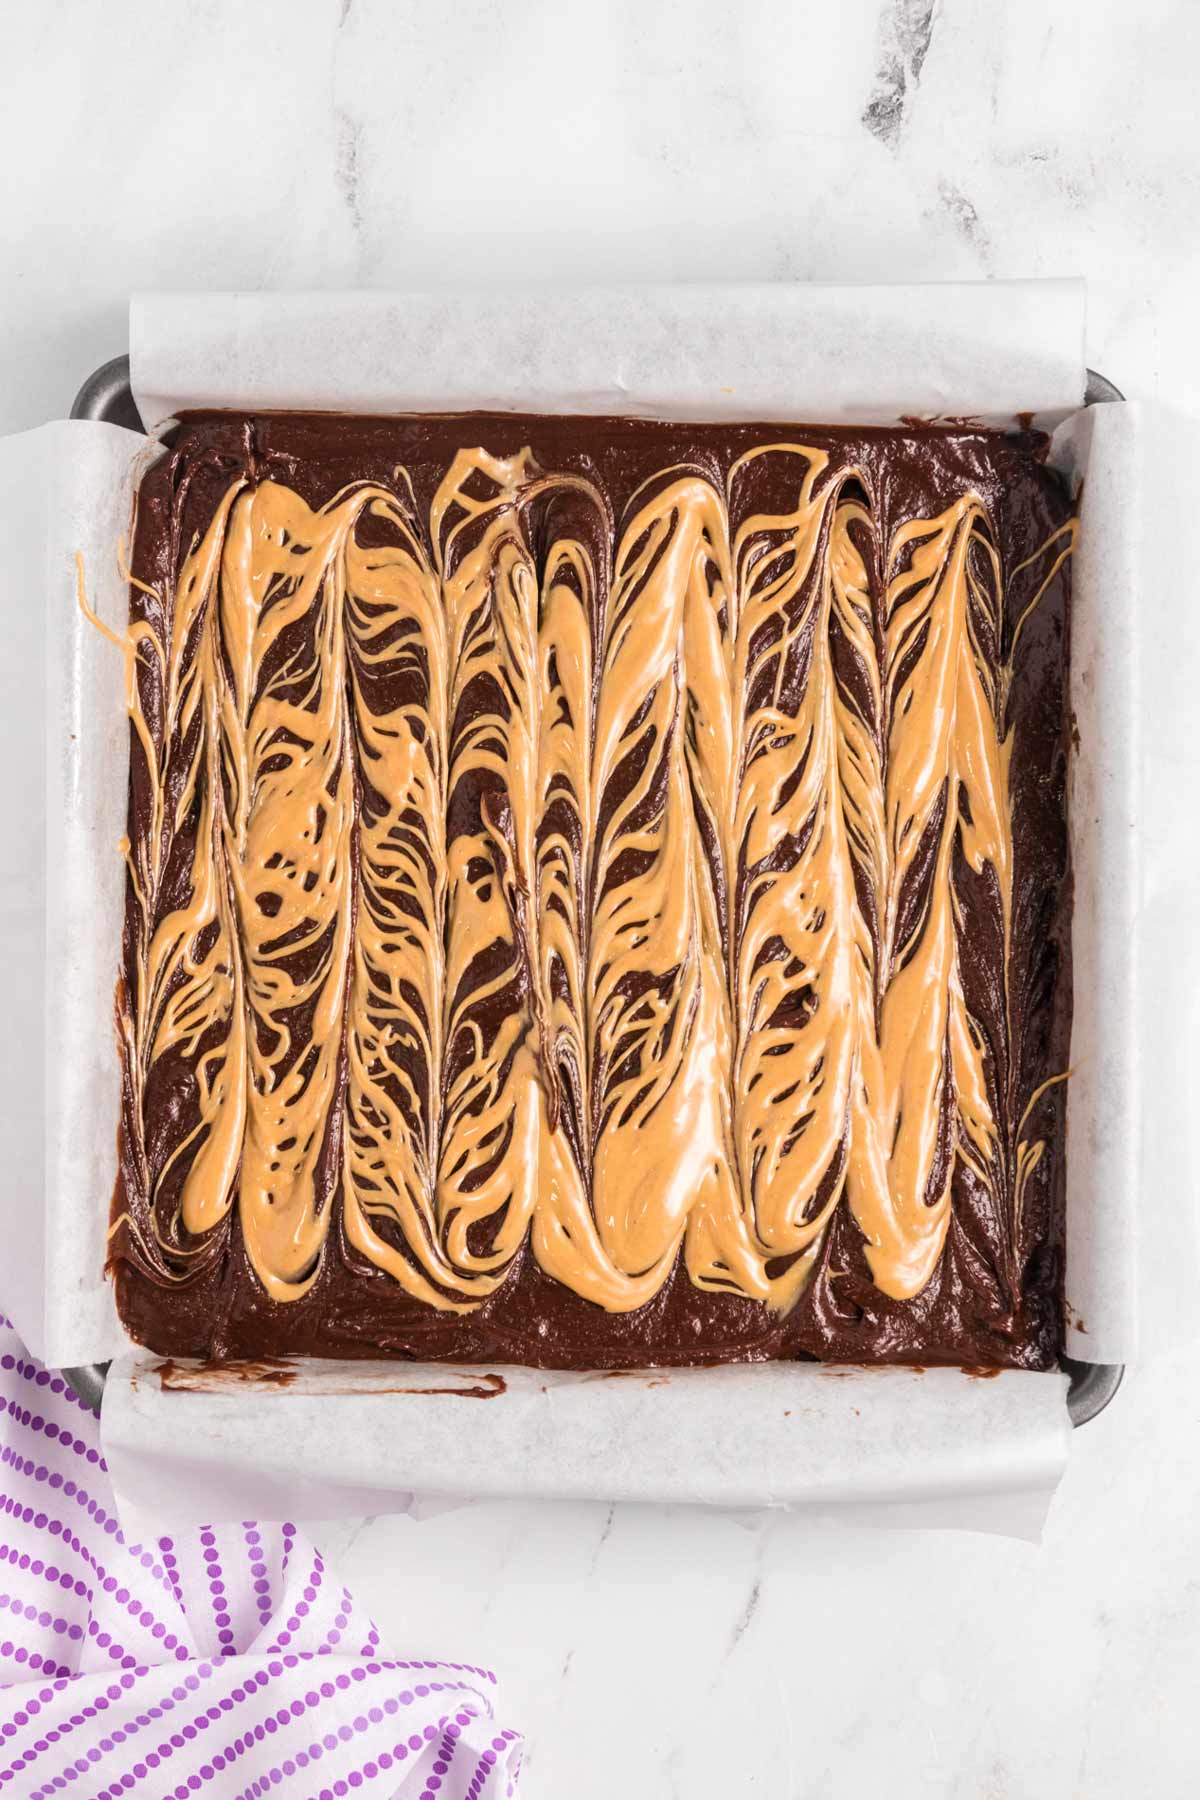 brownie batter in pan with peanut butter swirled on top.